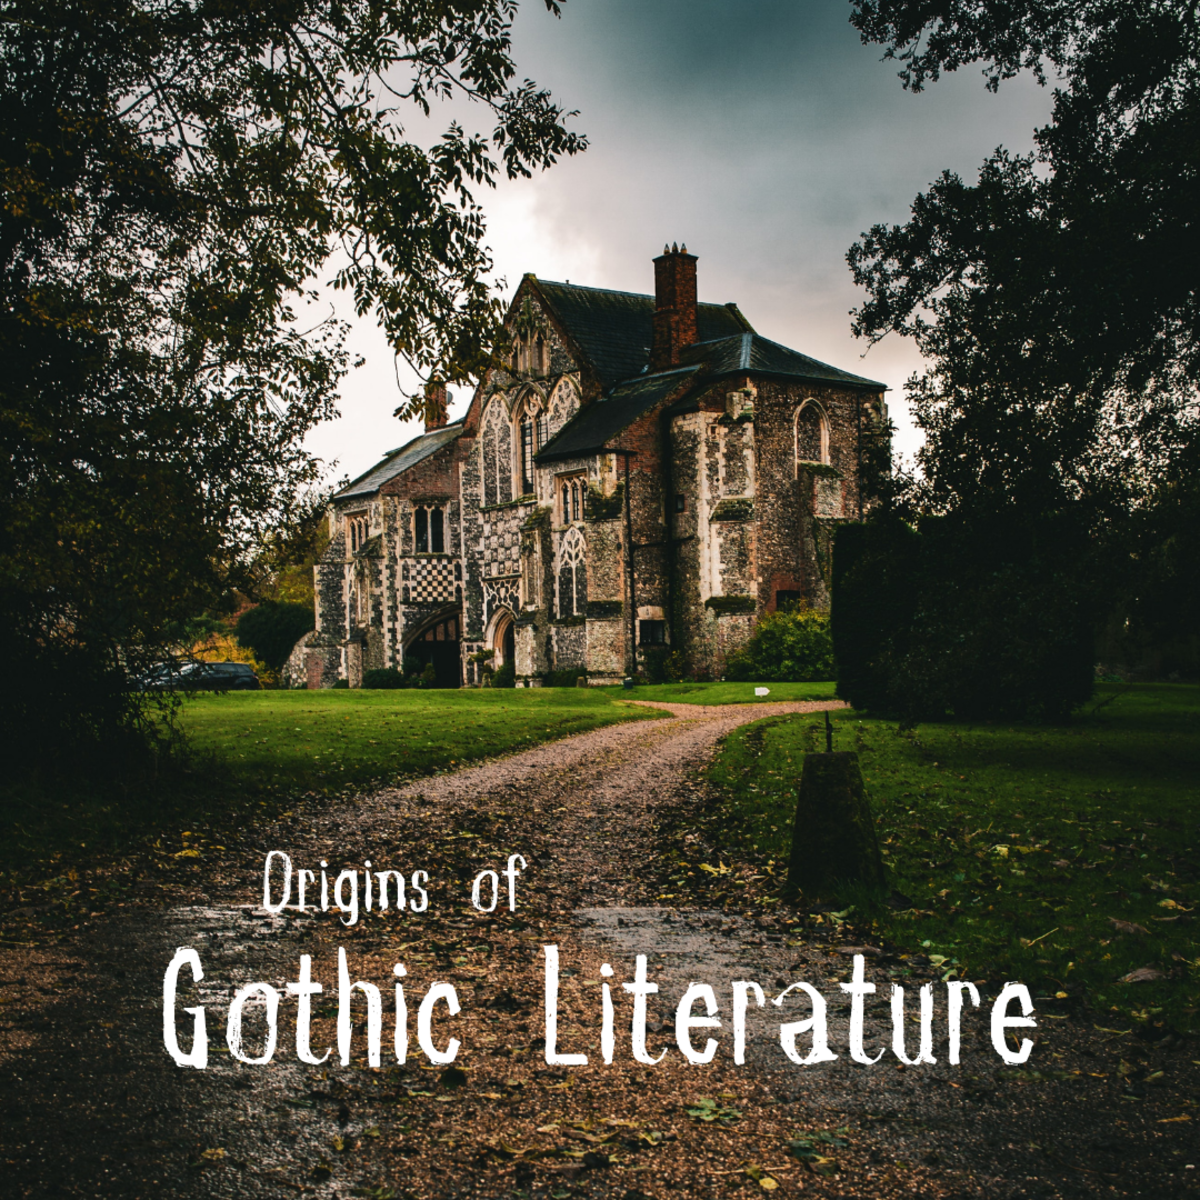 Gothic literature was introduced in the 18th century.